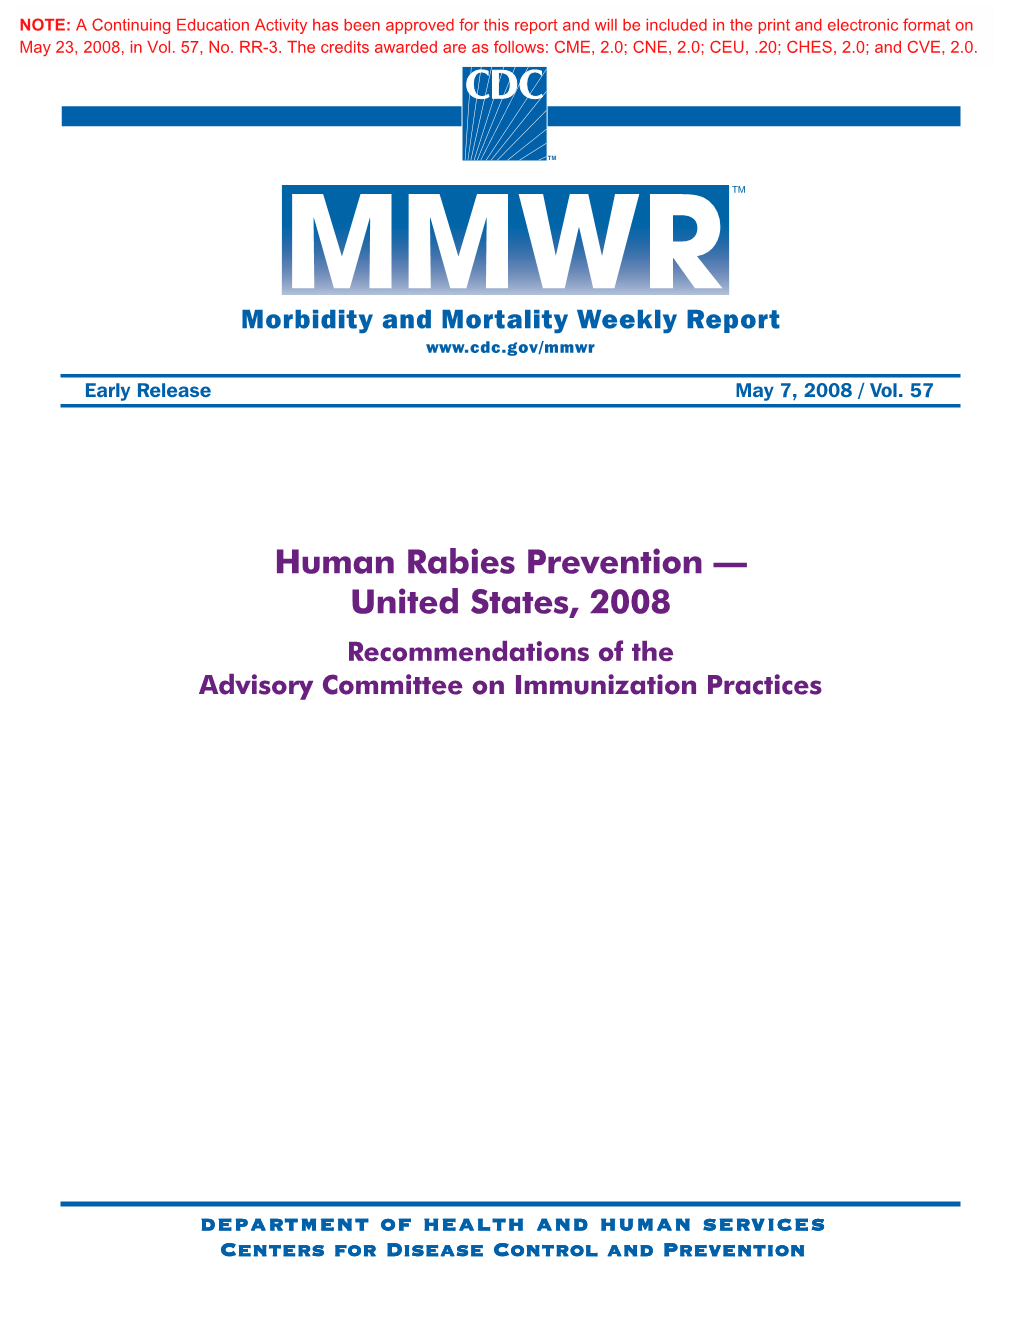 CDC Human Rabies Prevention-United States, 2008